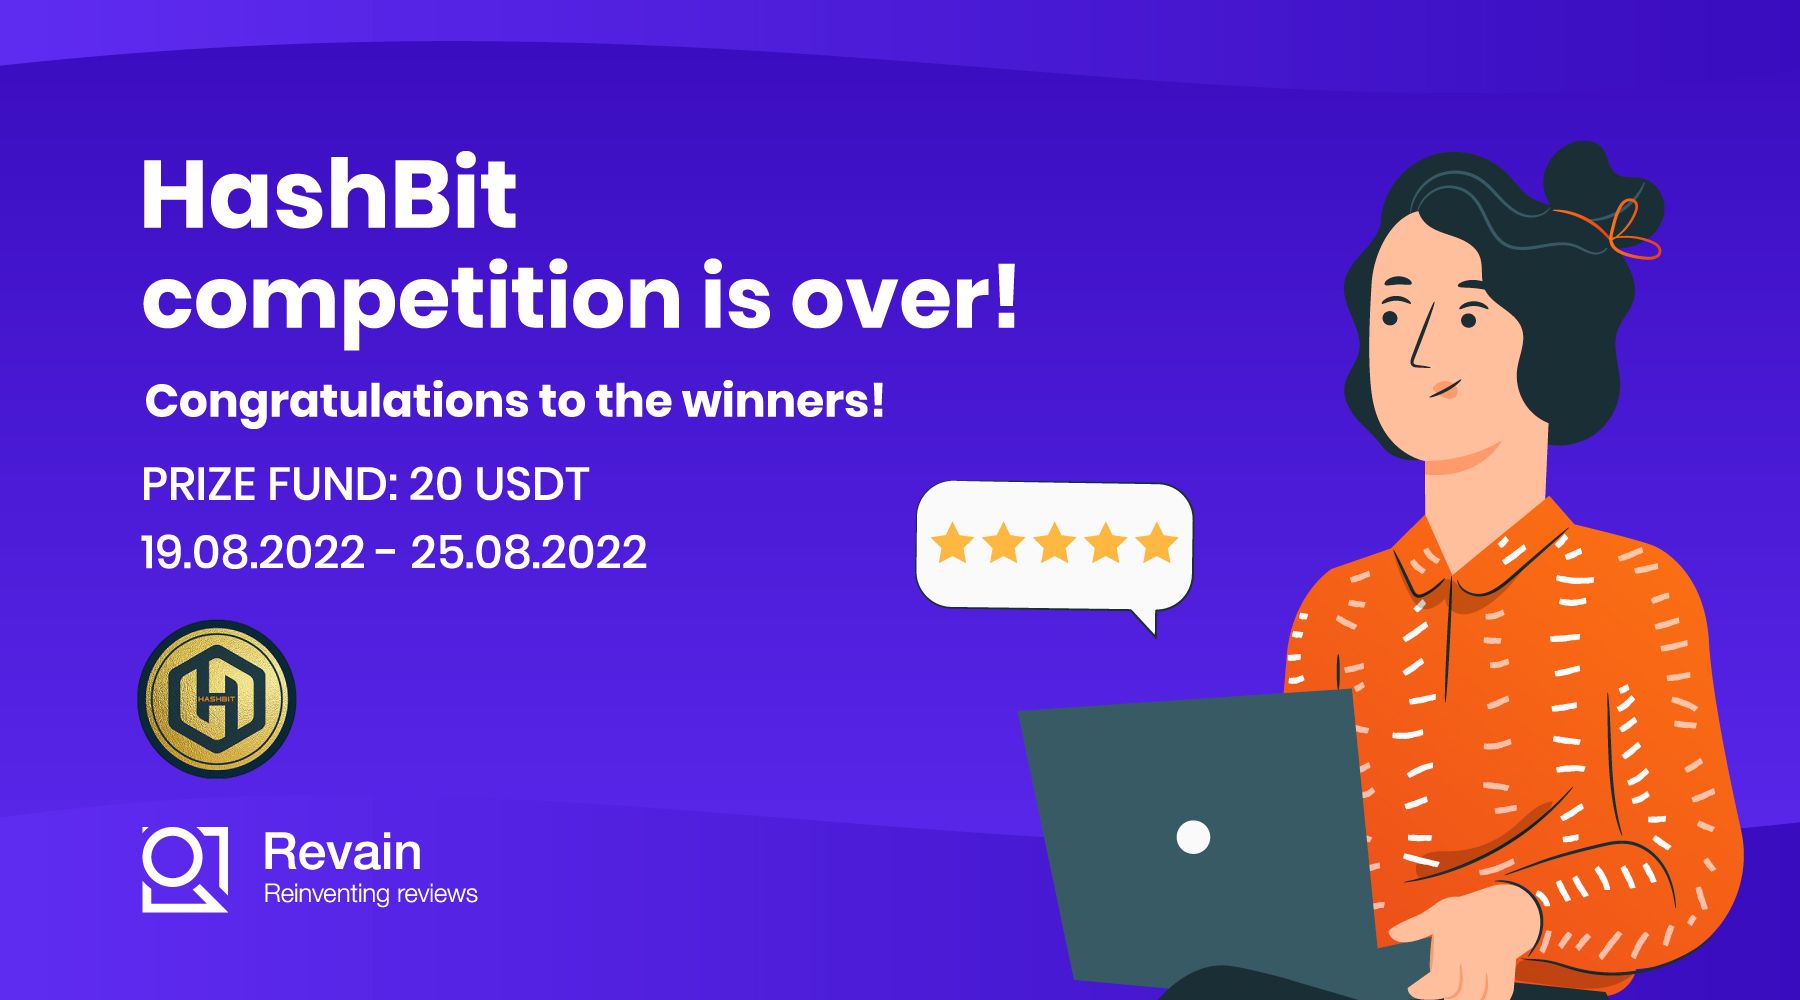 Review competition with HashBit & Revain has come to an end!